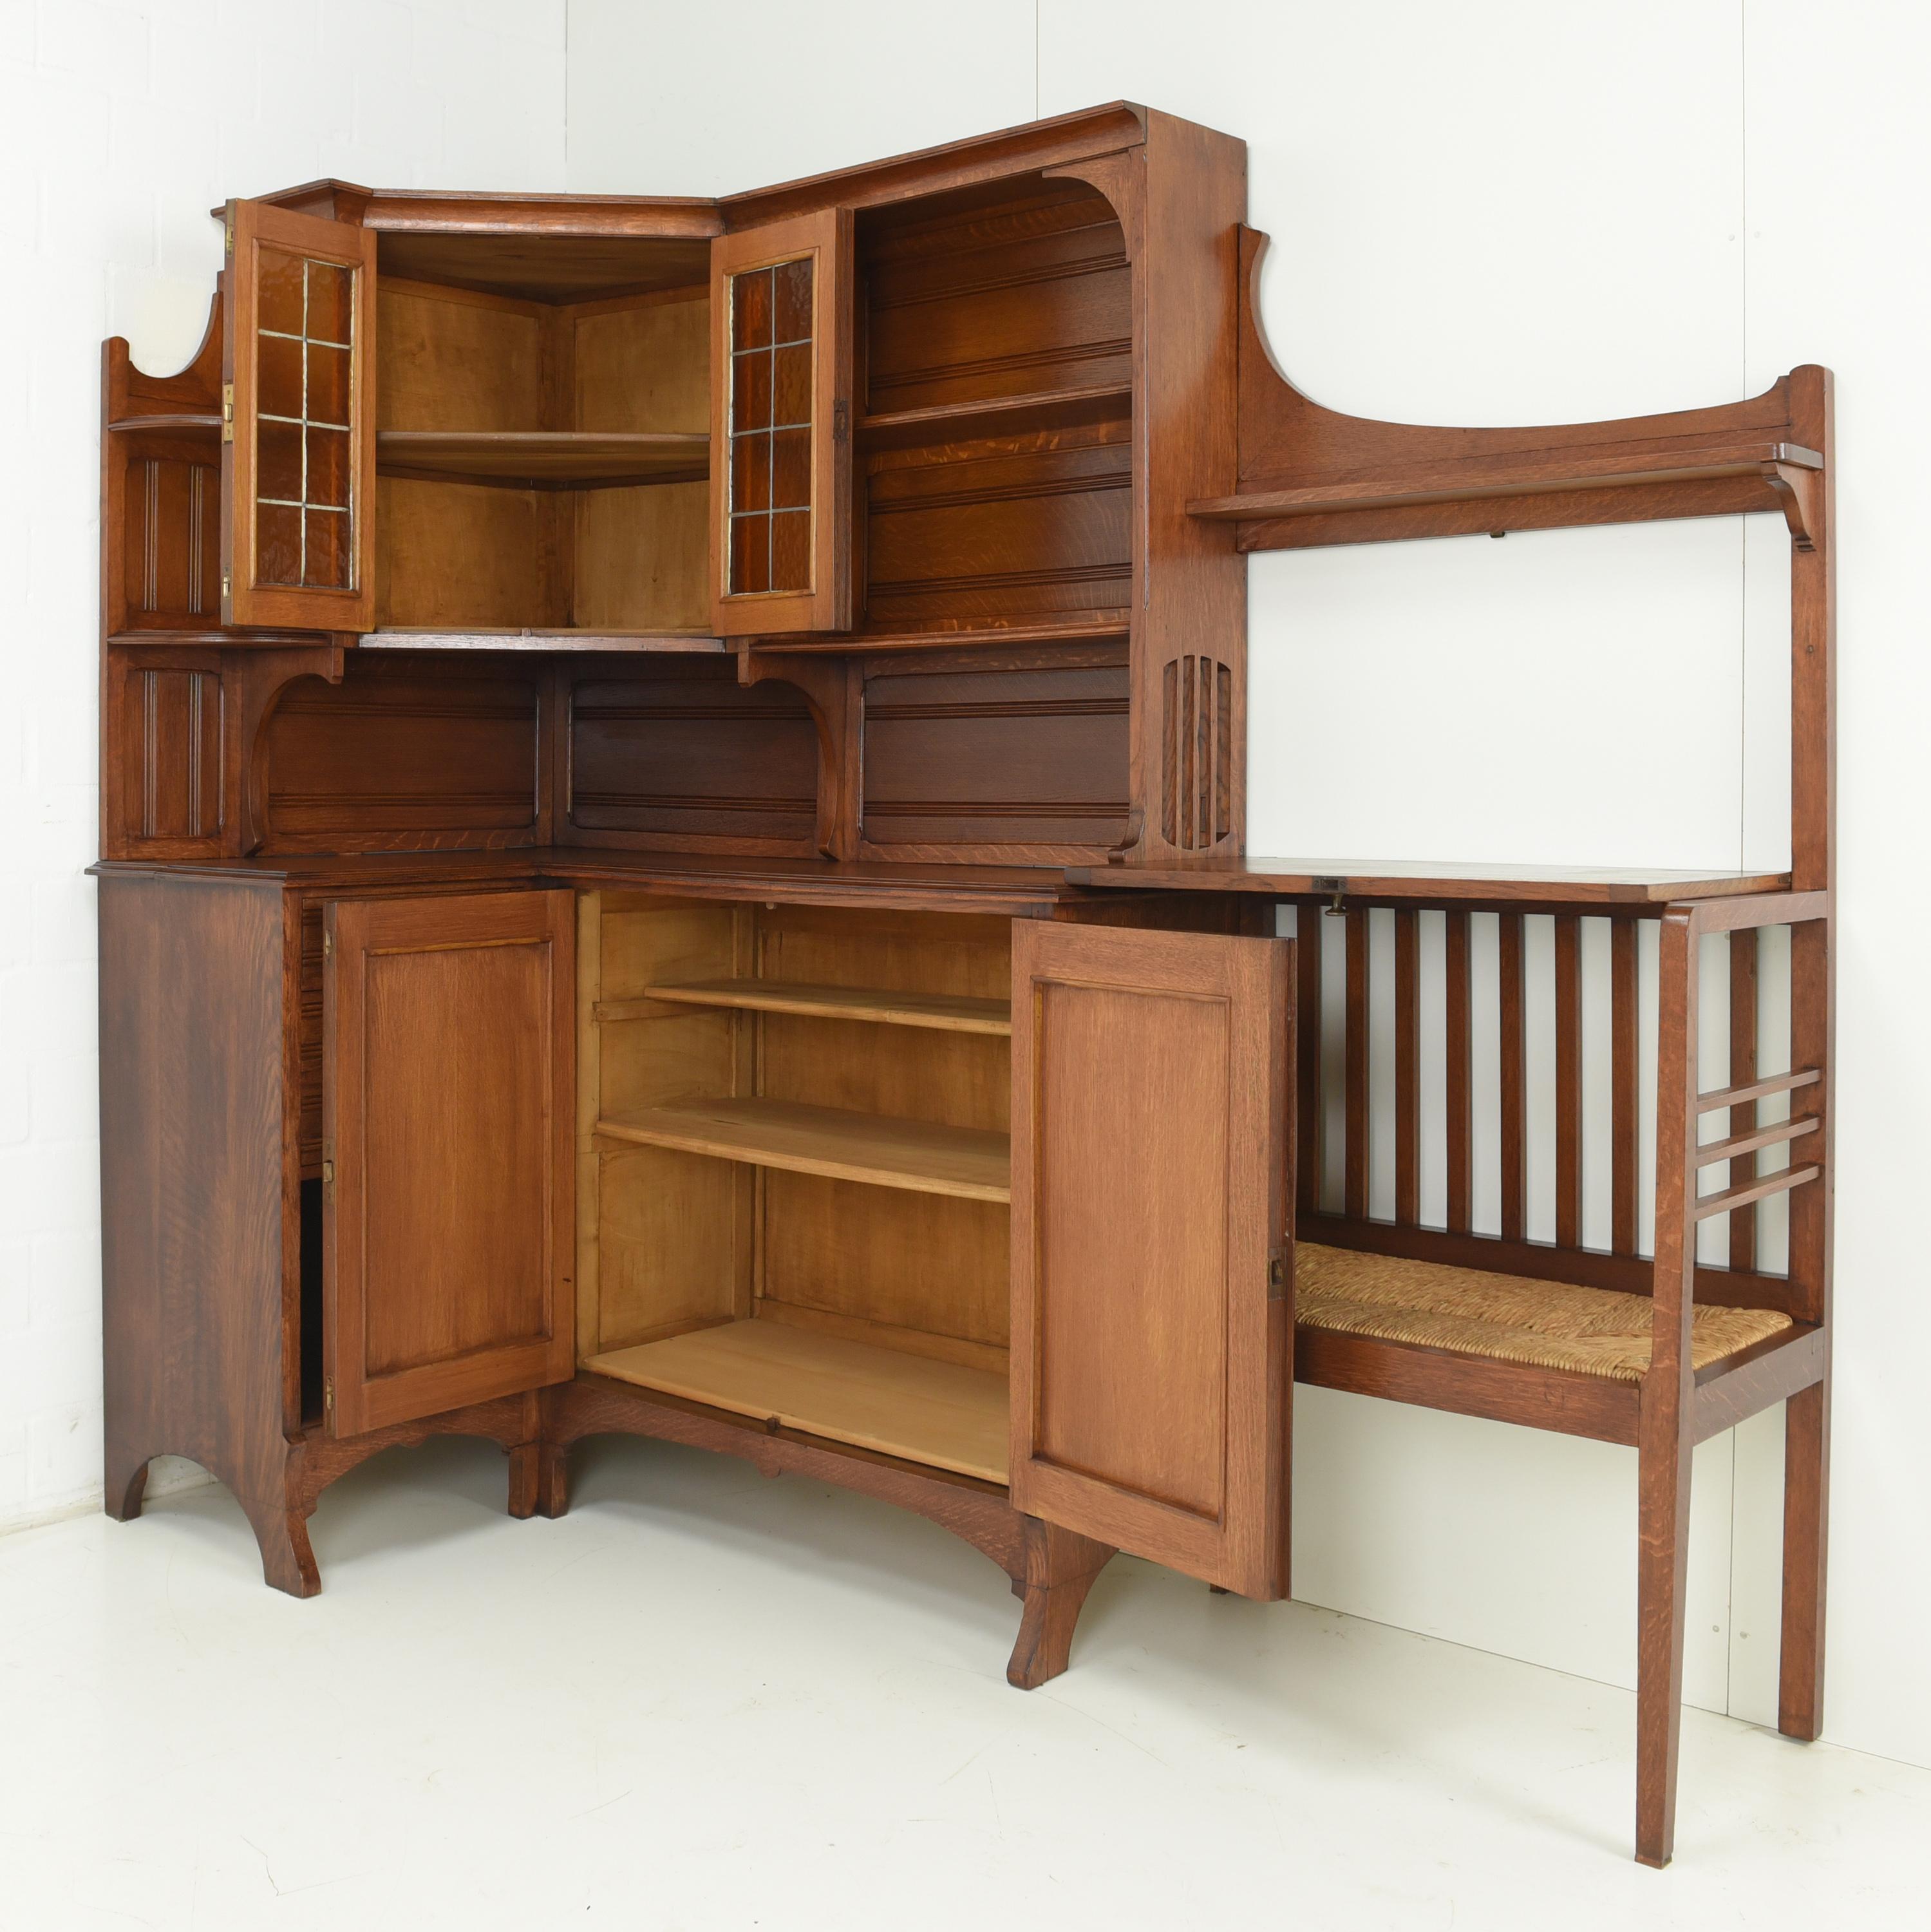 Corner cabinet with bench restored Art Nouveau around 1915 Oak corner furniture

Features:
Asymmetrical corner cabinet with adjoining bench
Interesting division of storage compartments
Organic shaping
High-quality original fittings
Original